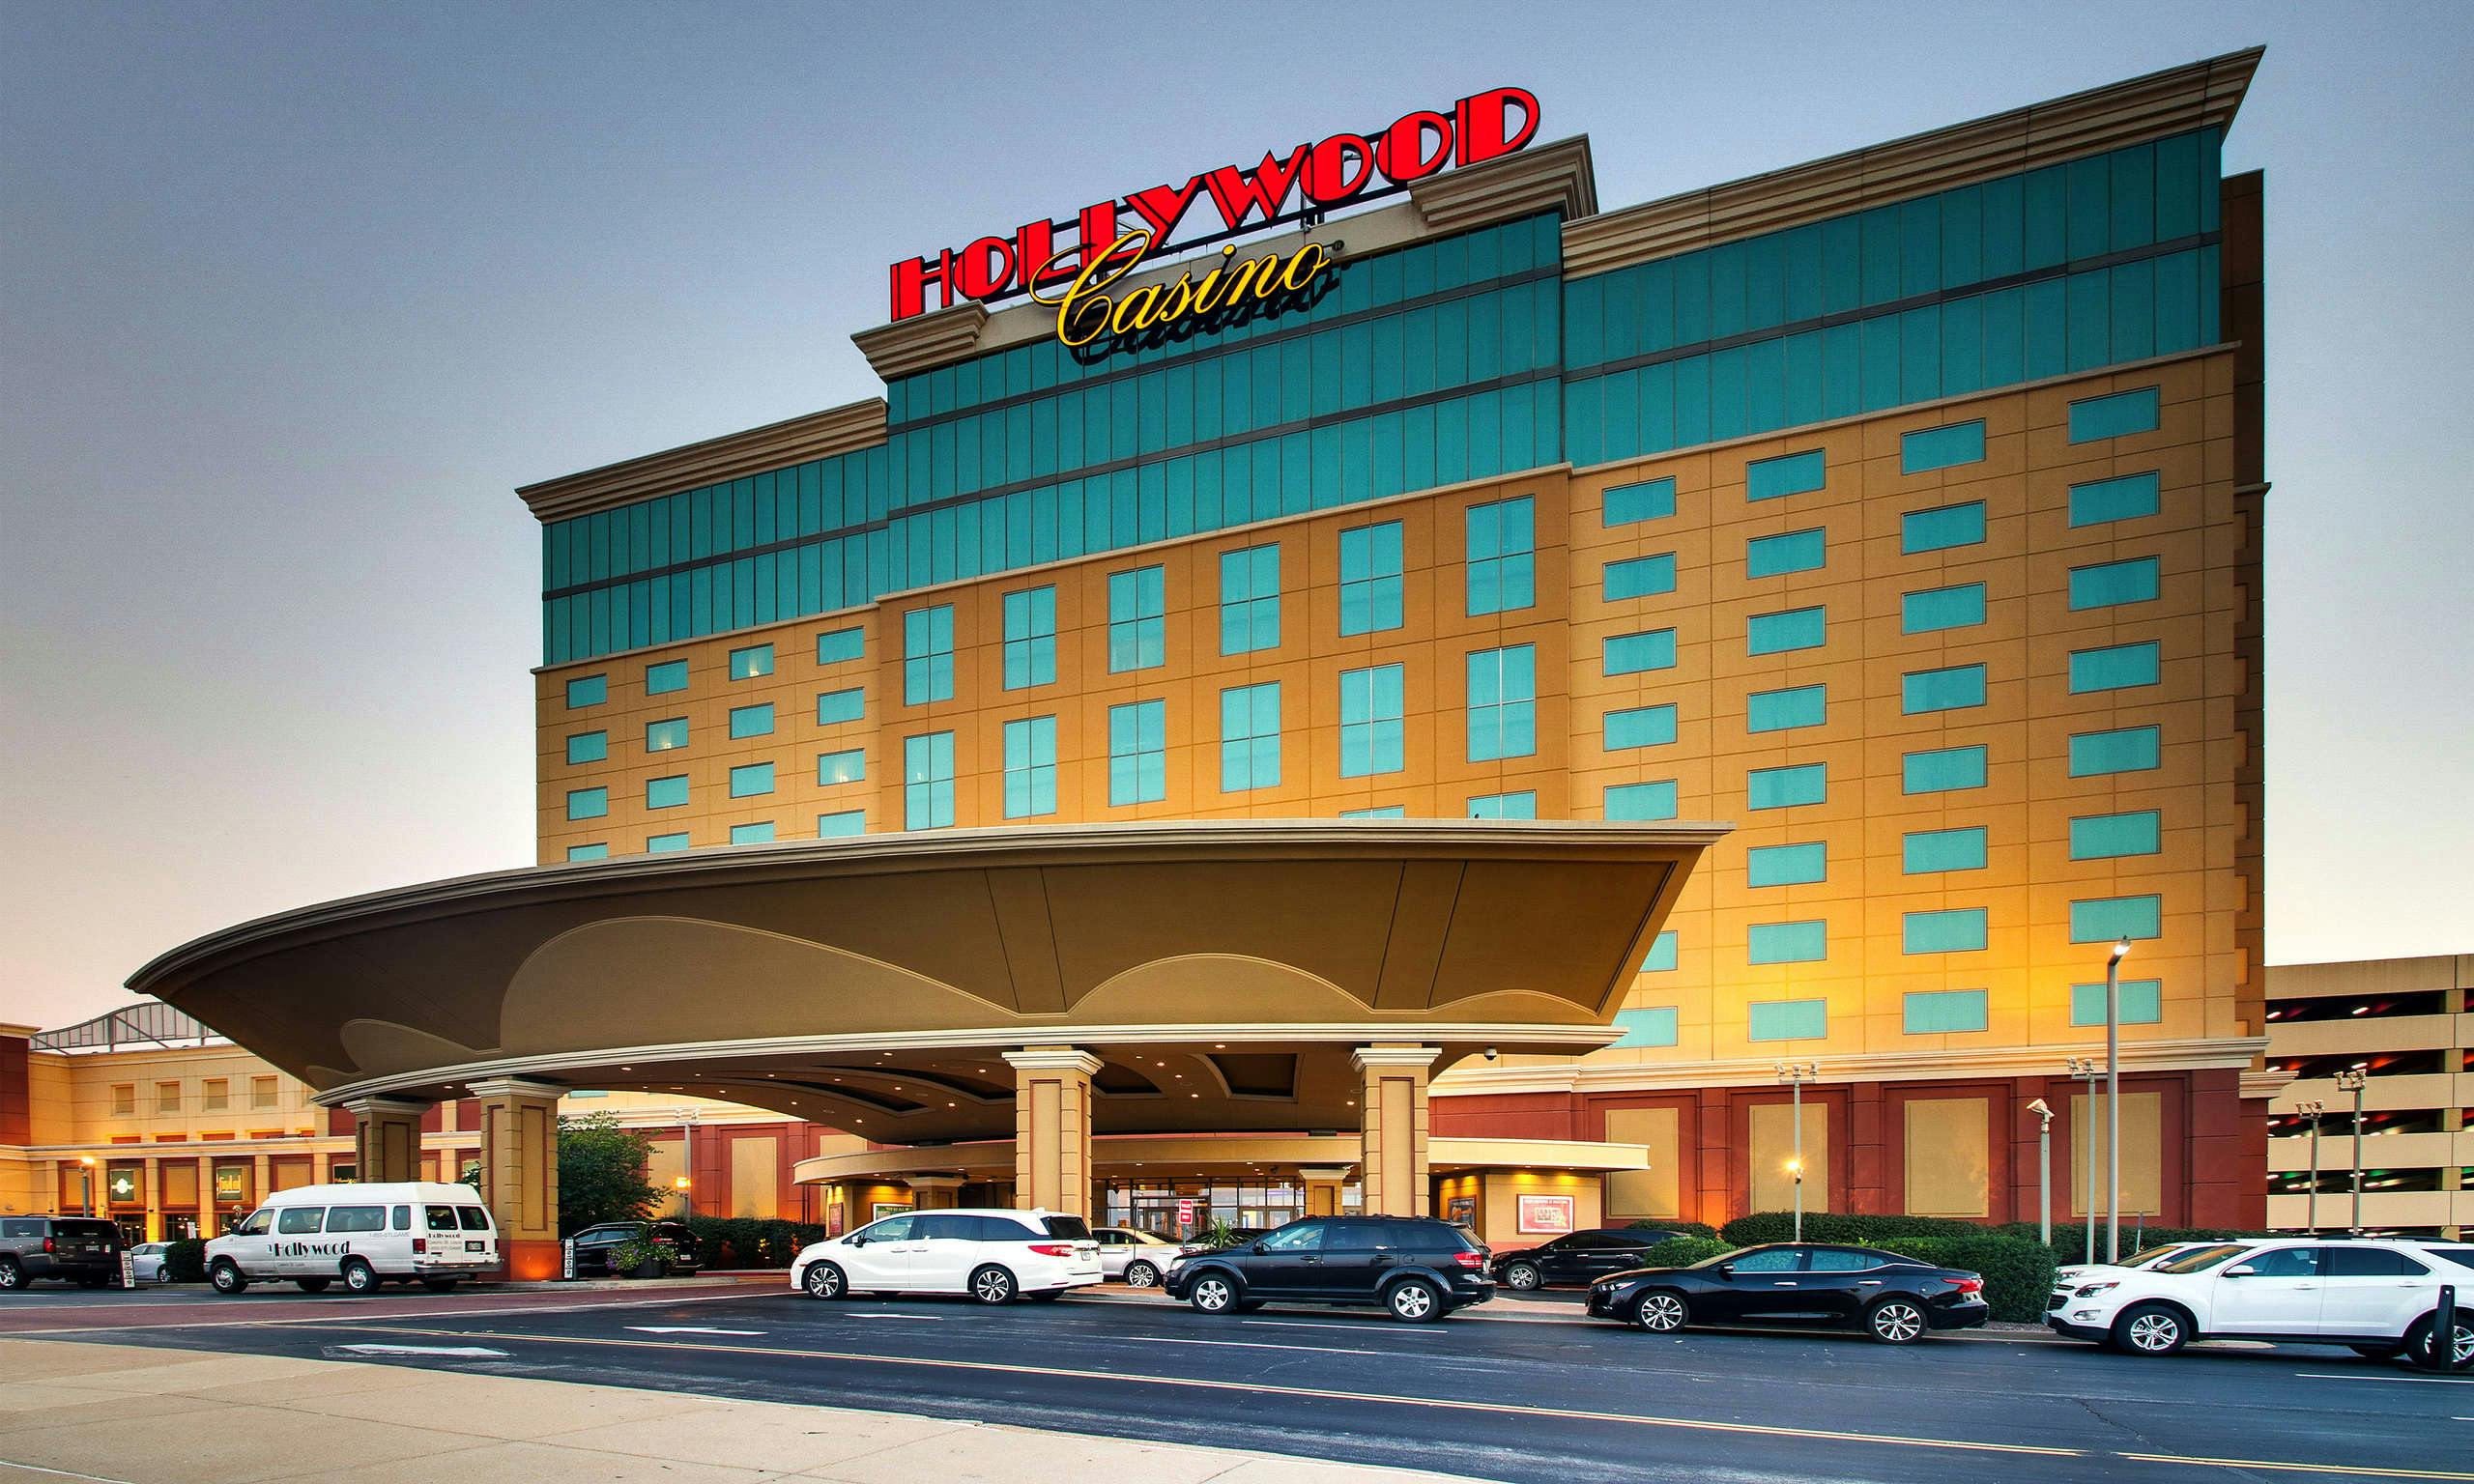 hollywood casino st louis reopening